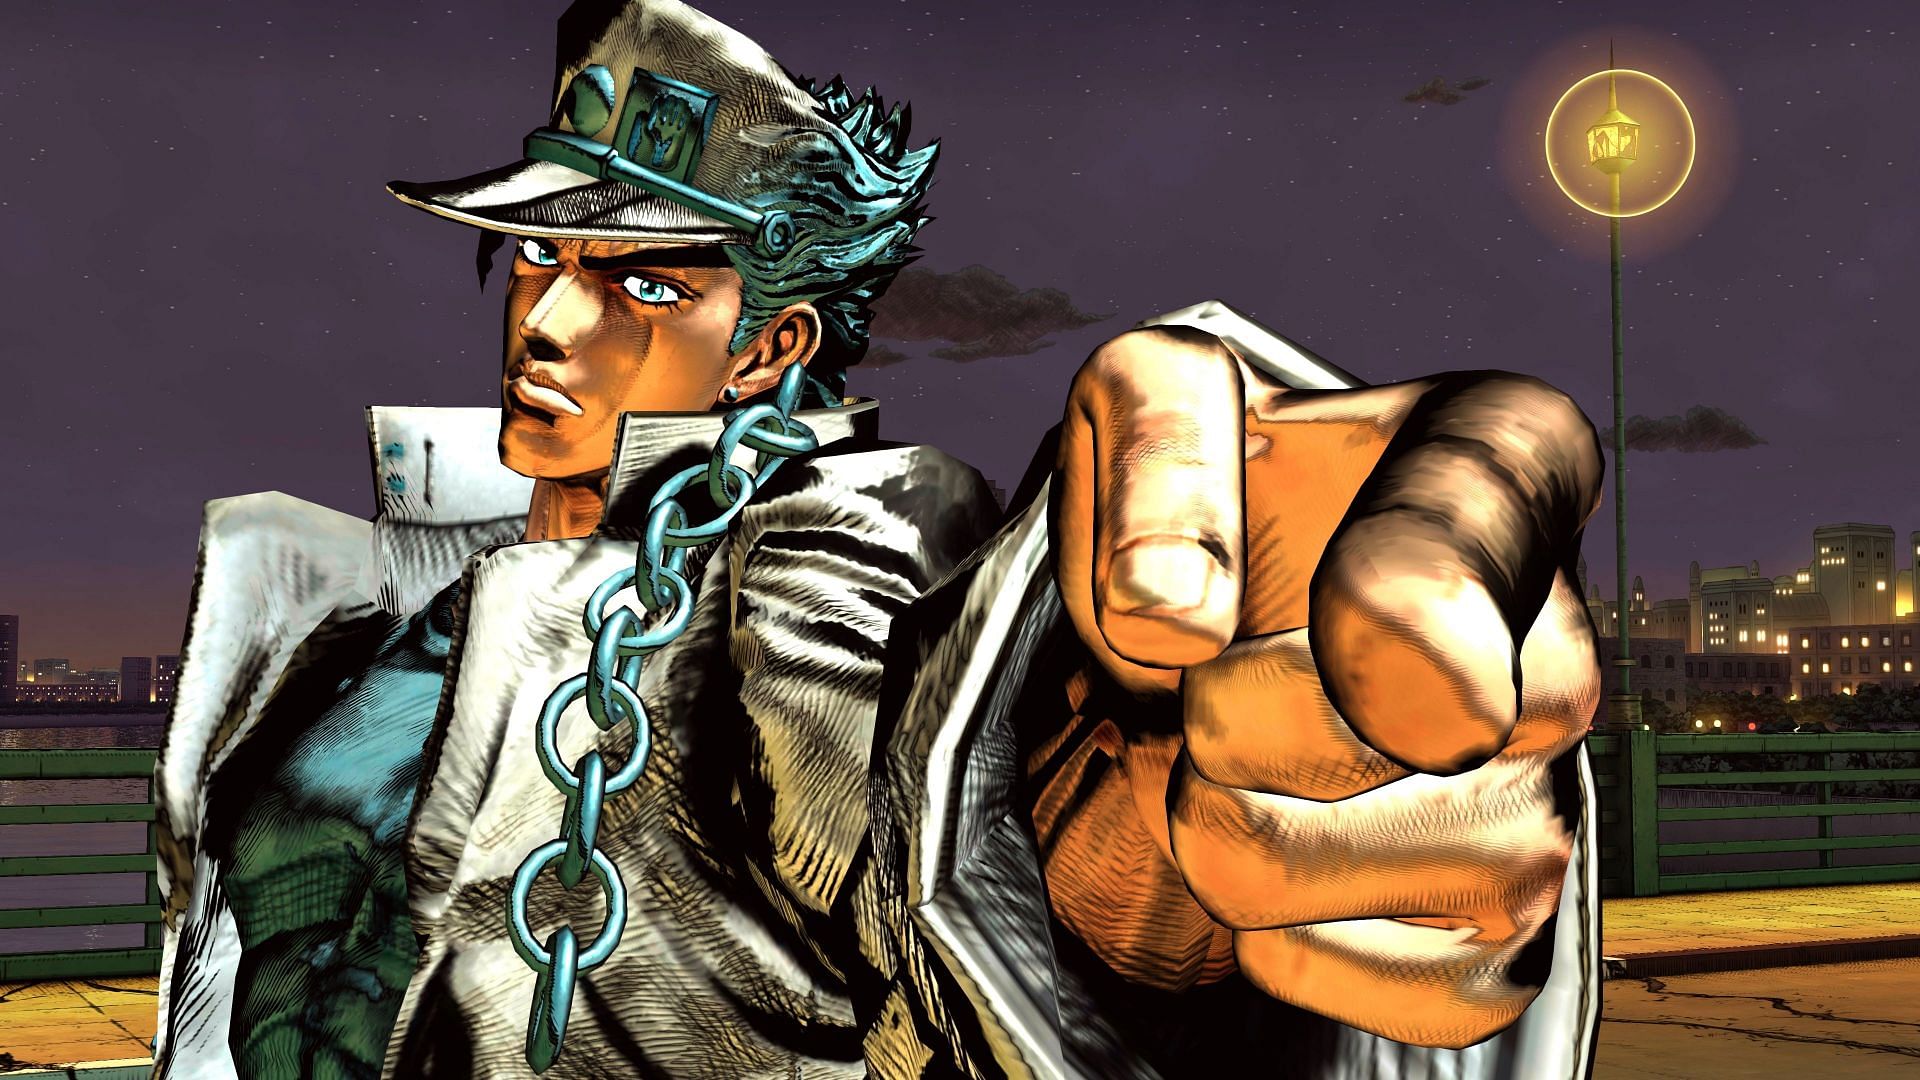 How To Customize Your Character In Jojo's Bizarre Adventure: ASBR